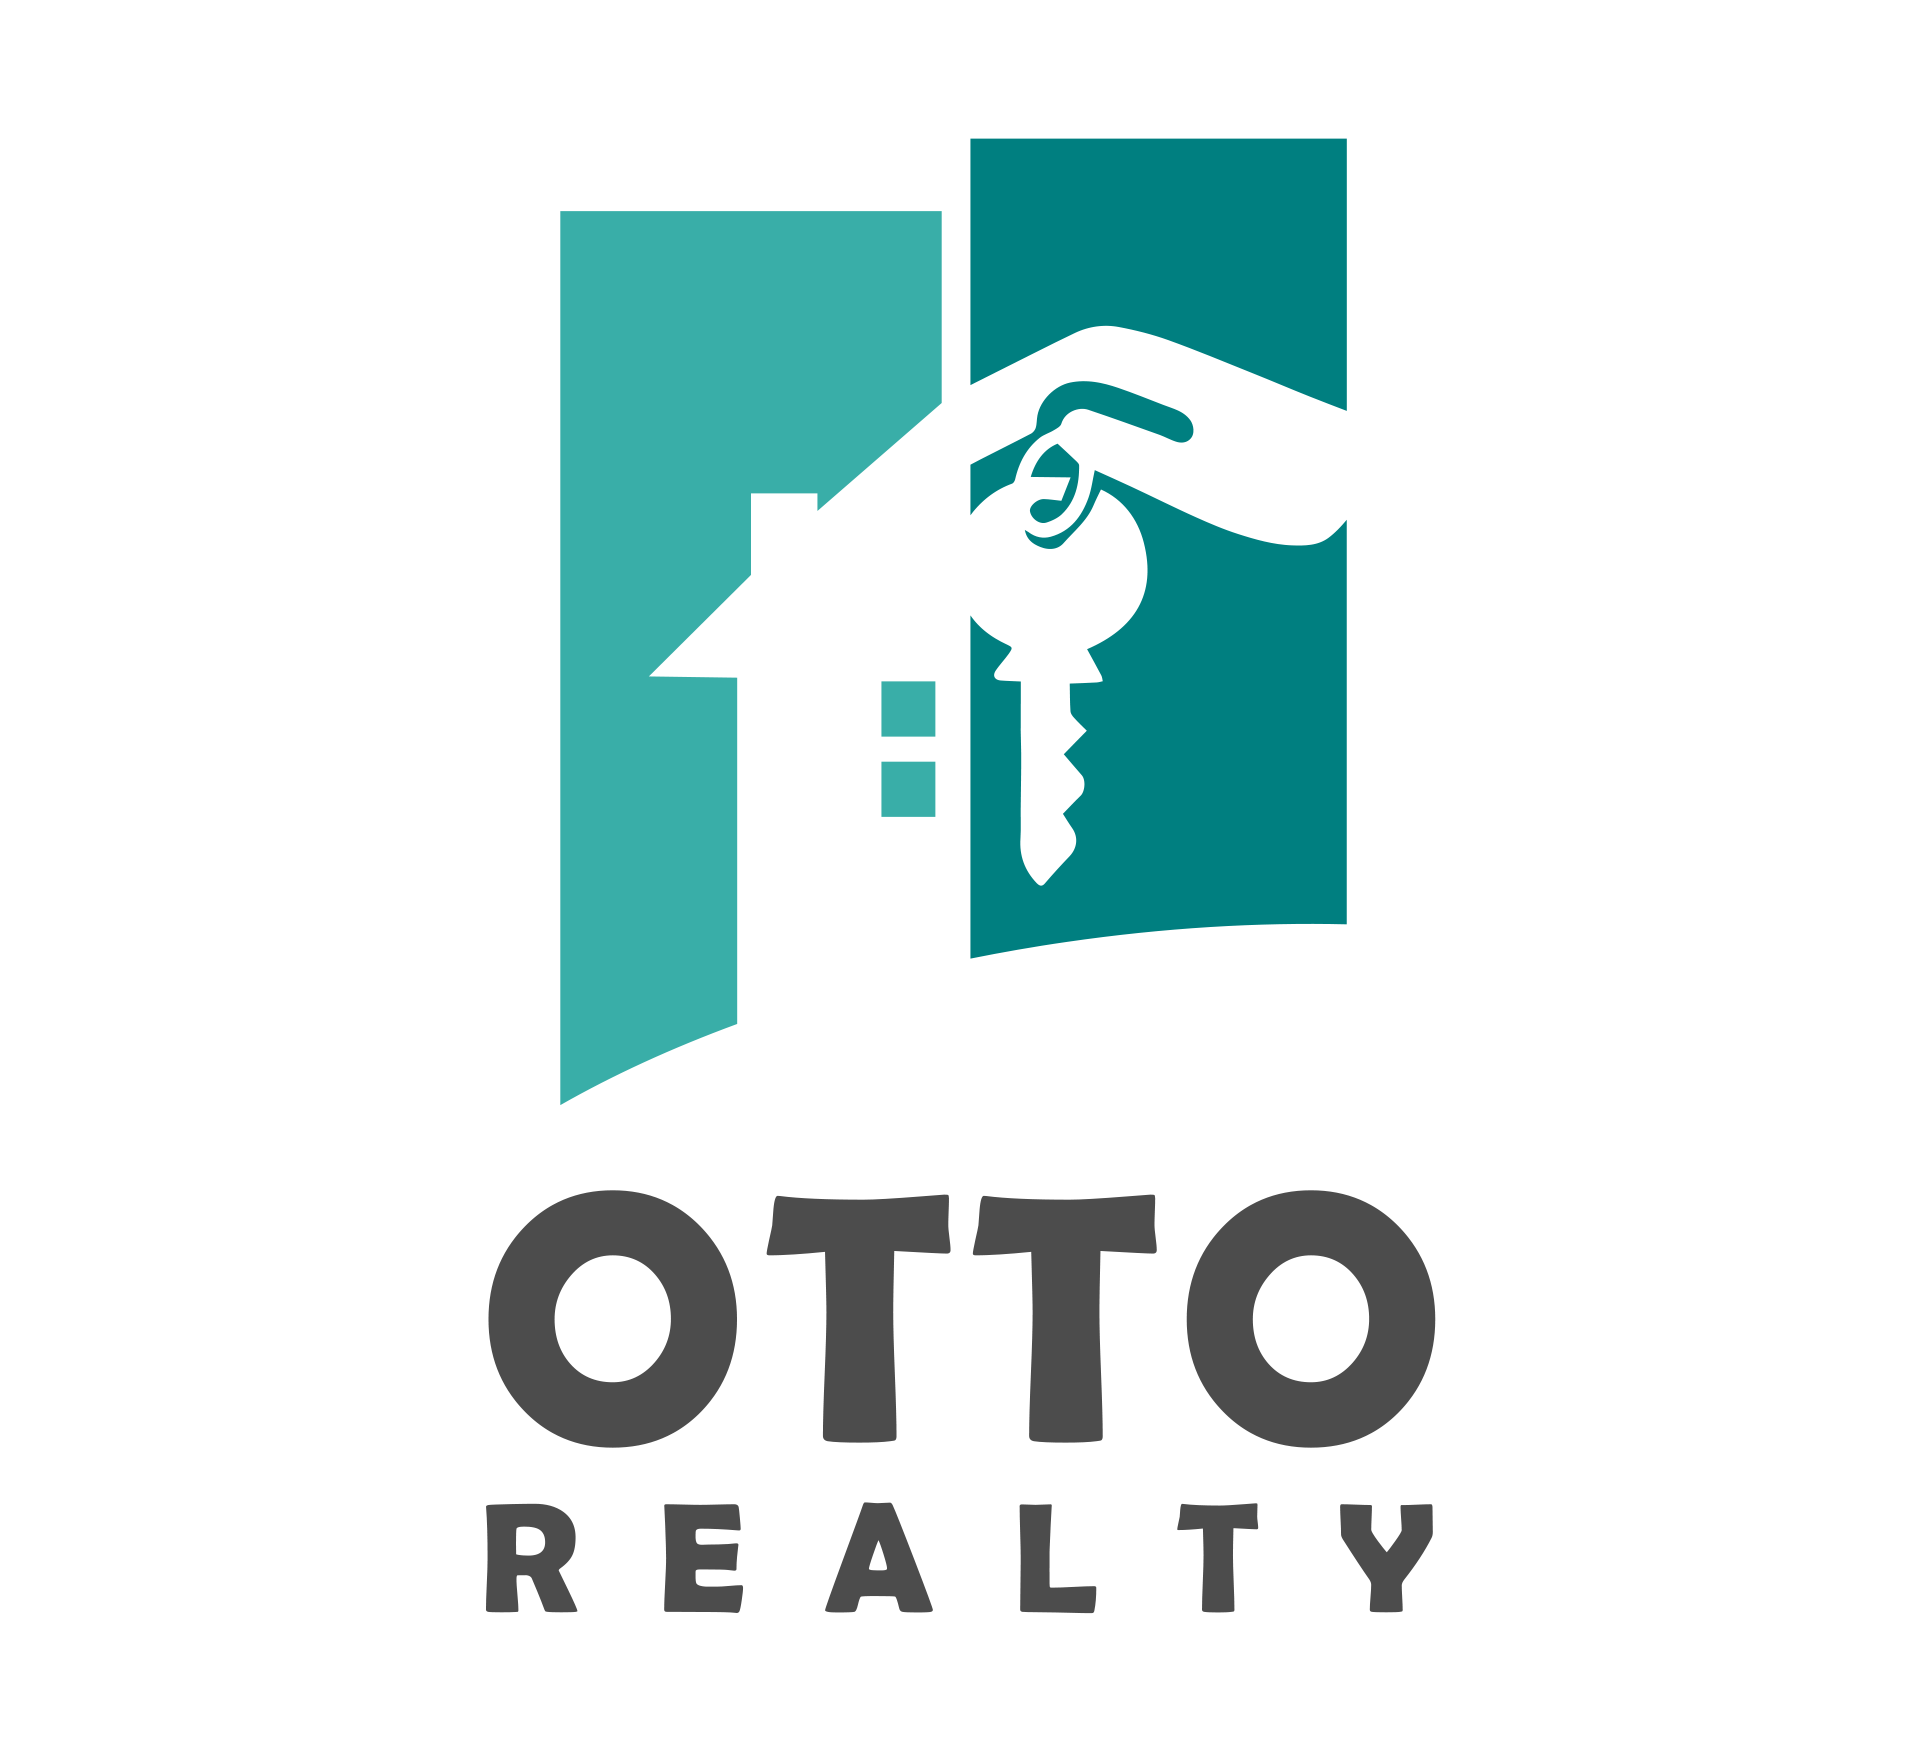 Otto Realty